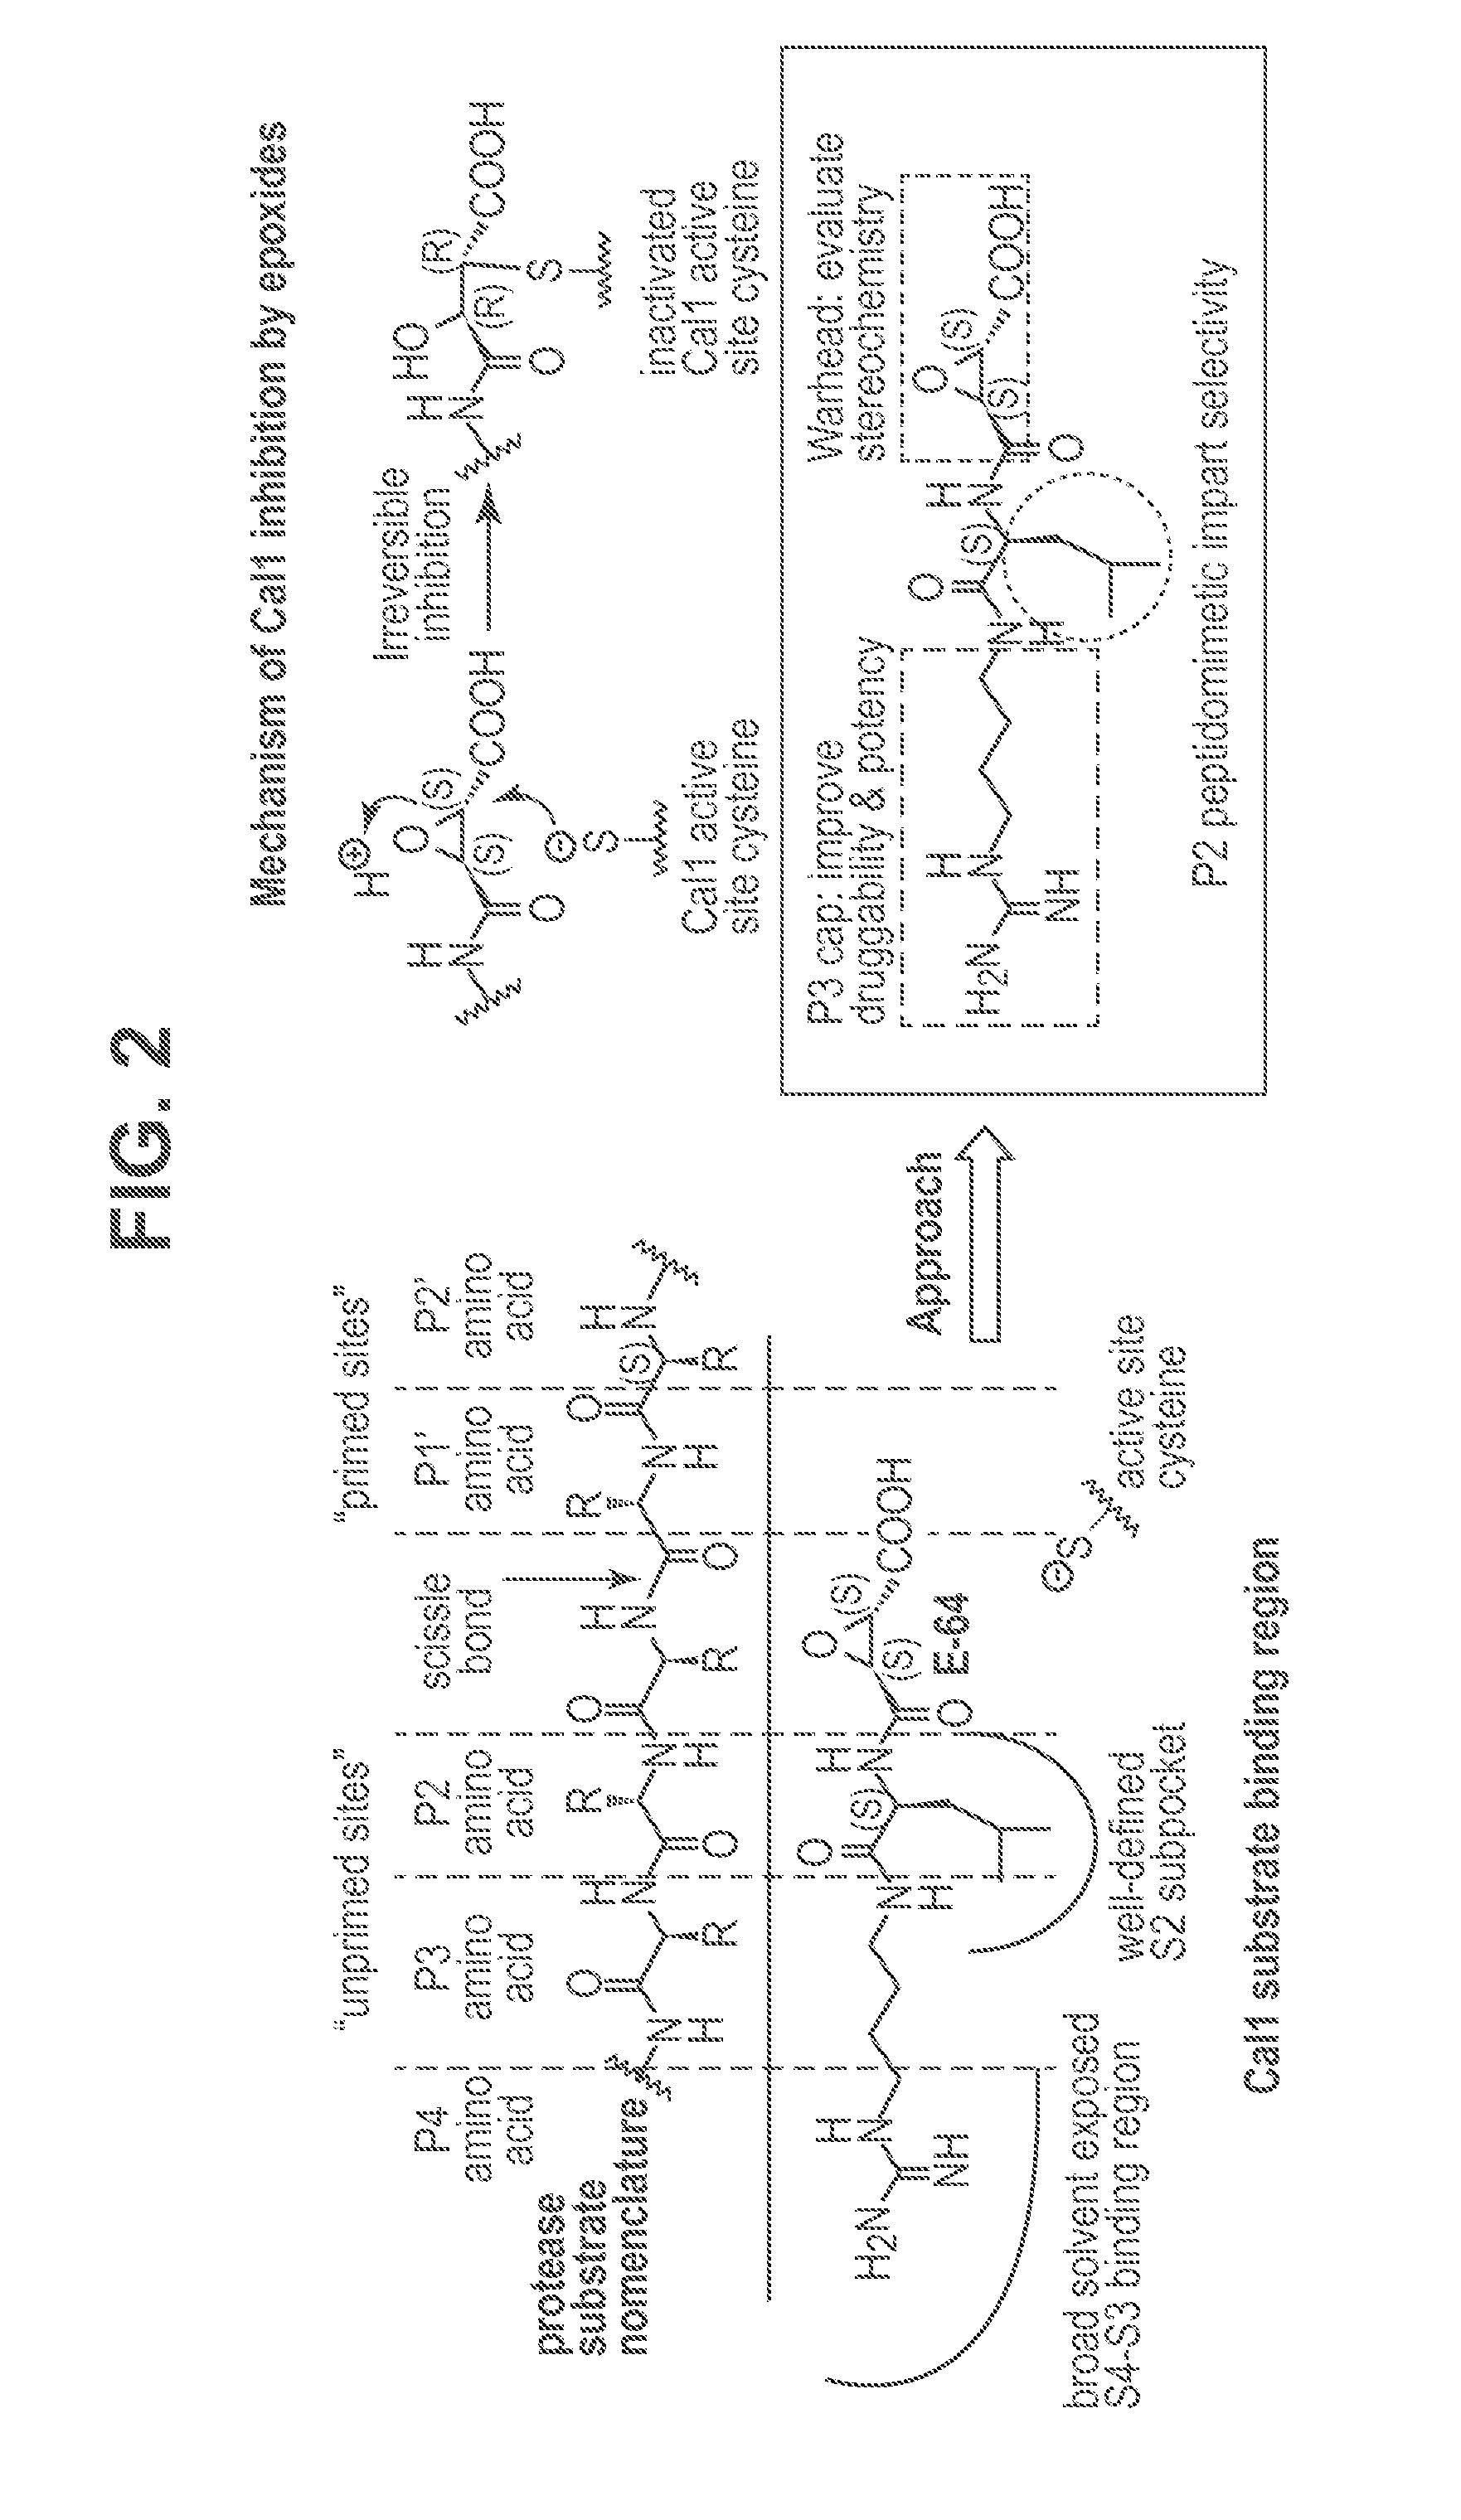 Novel Cysteine Protease Inhibitors and Uses Thereof